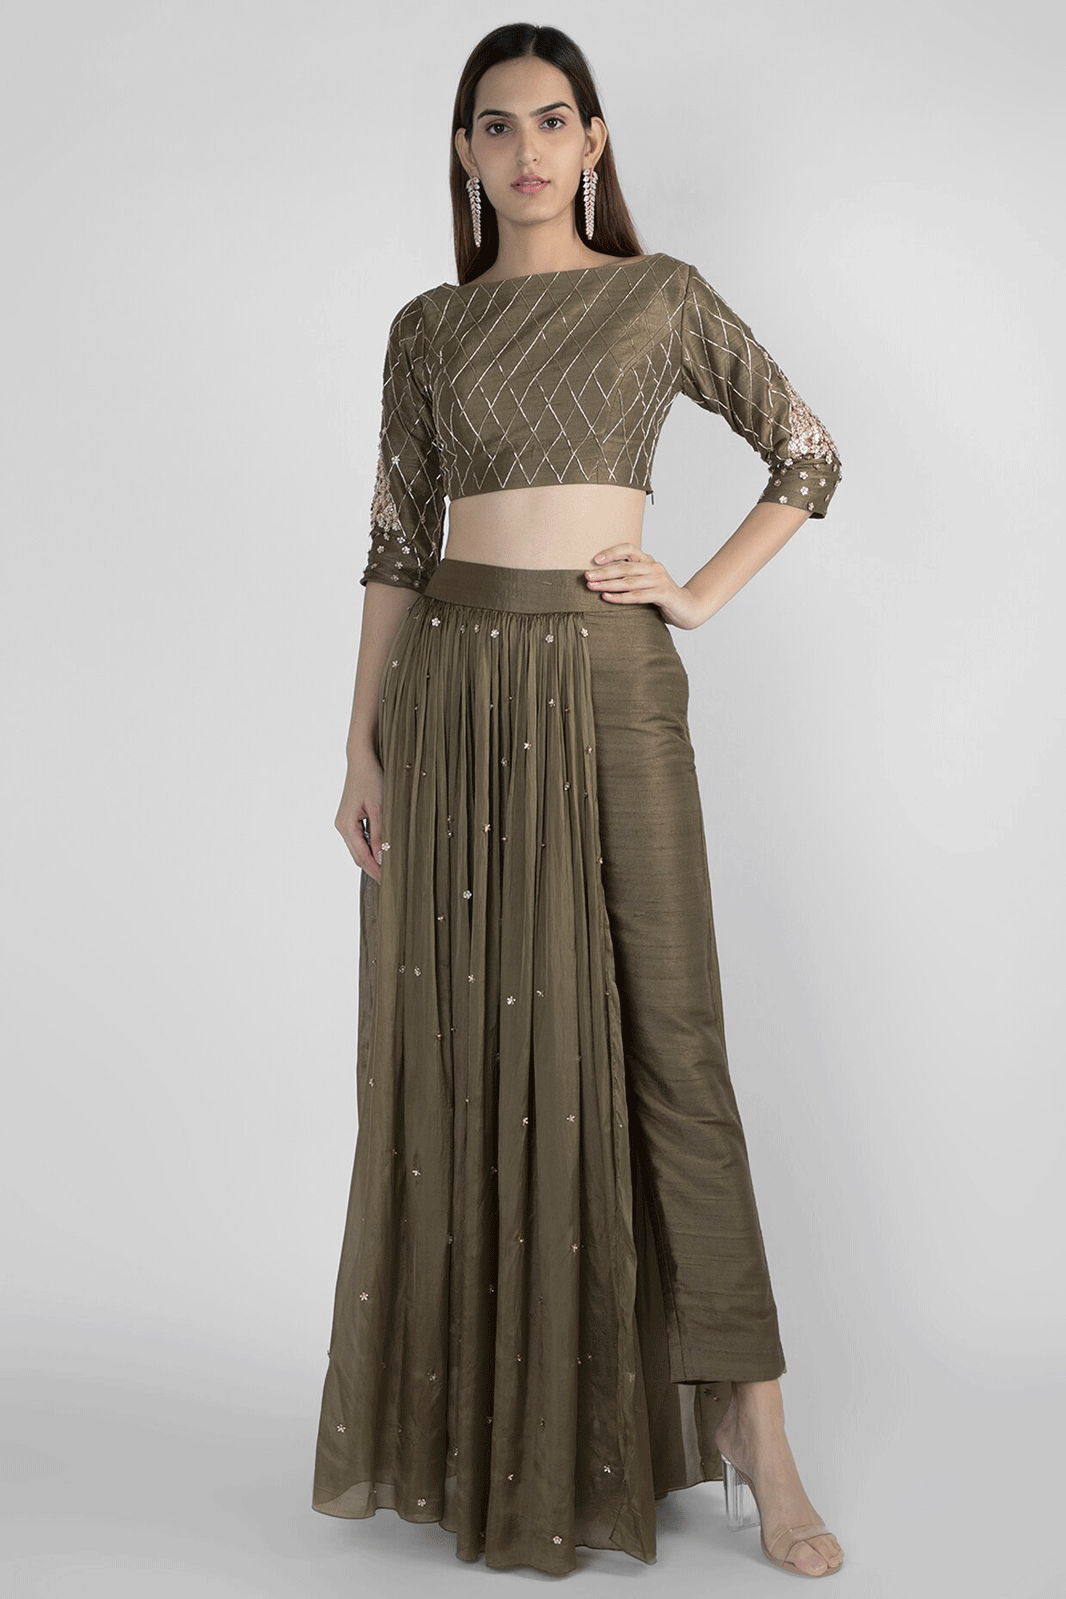 Olive Green Embroidered Crop Top With Pant Skirt